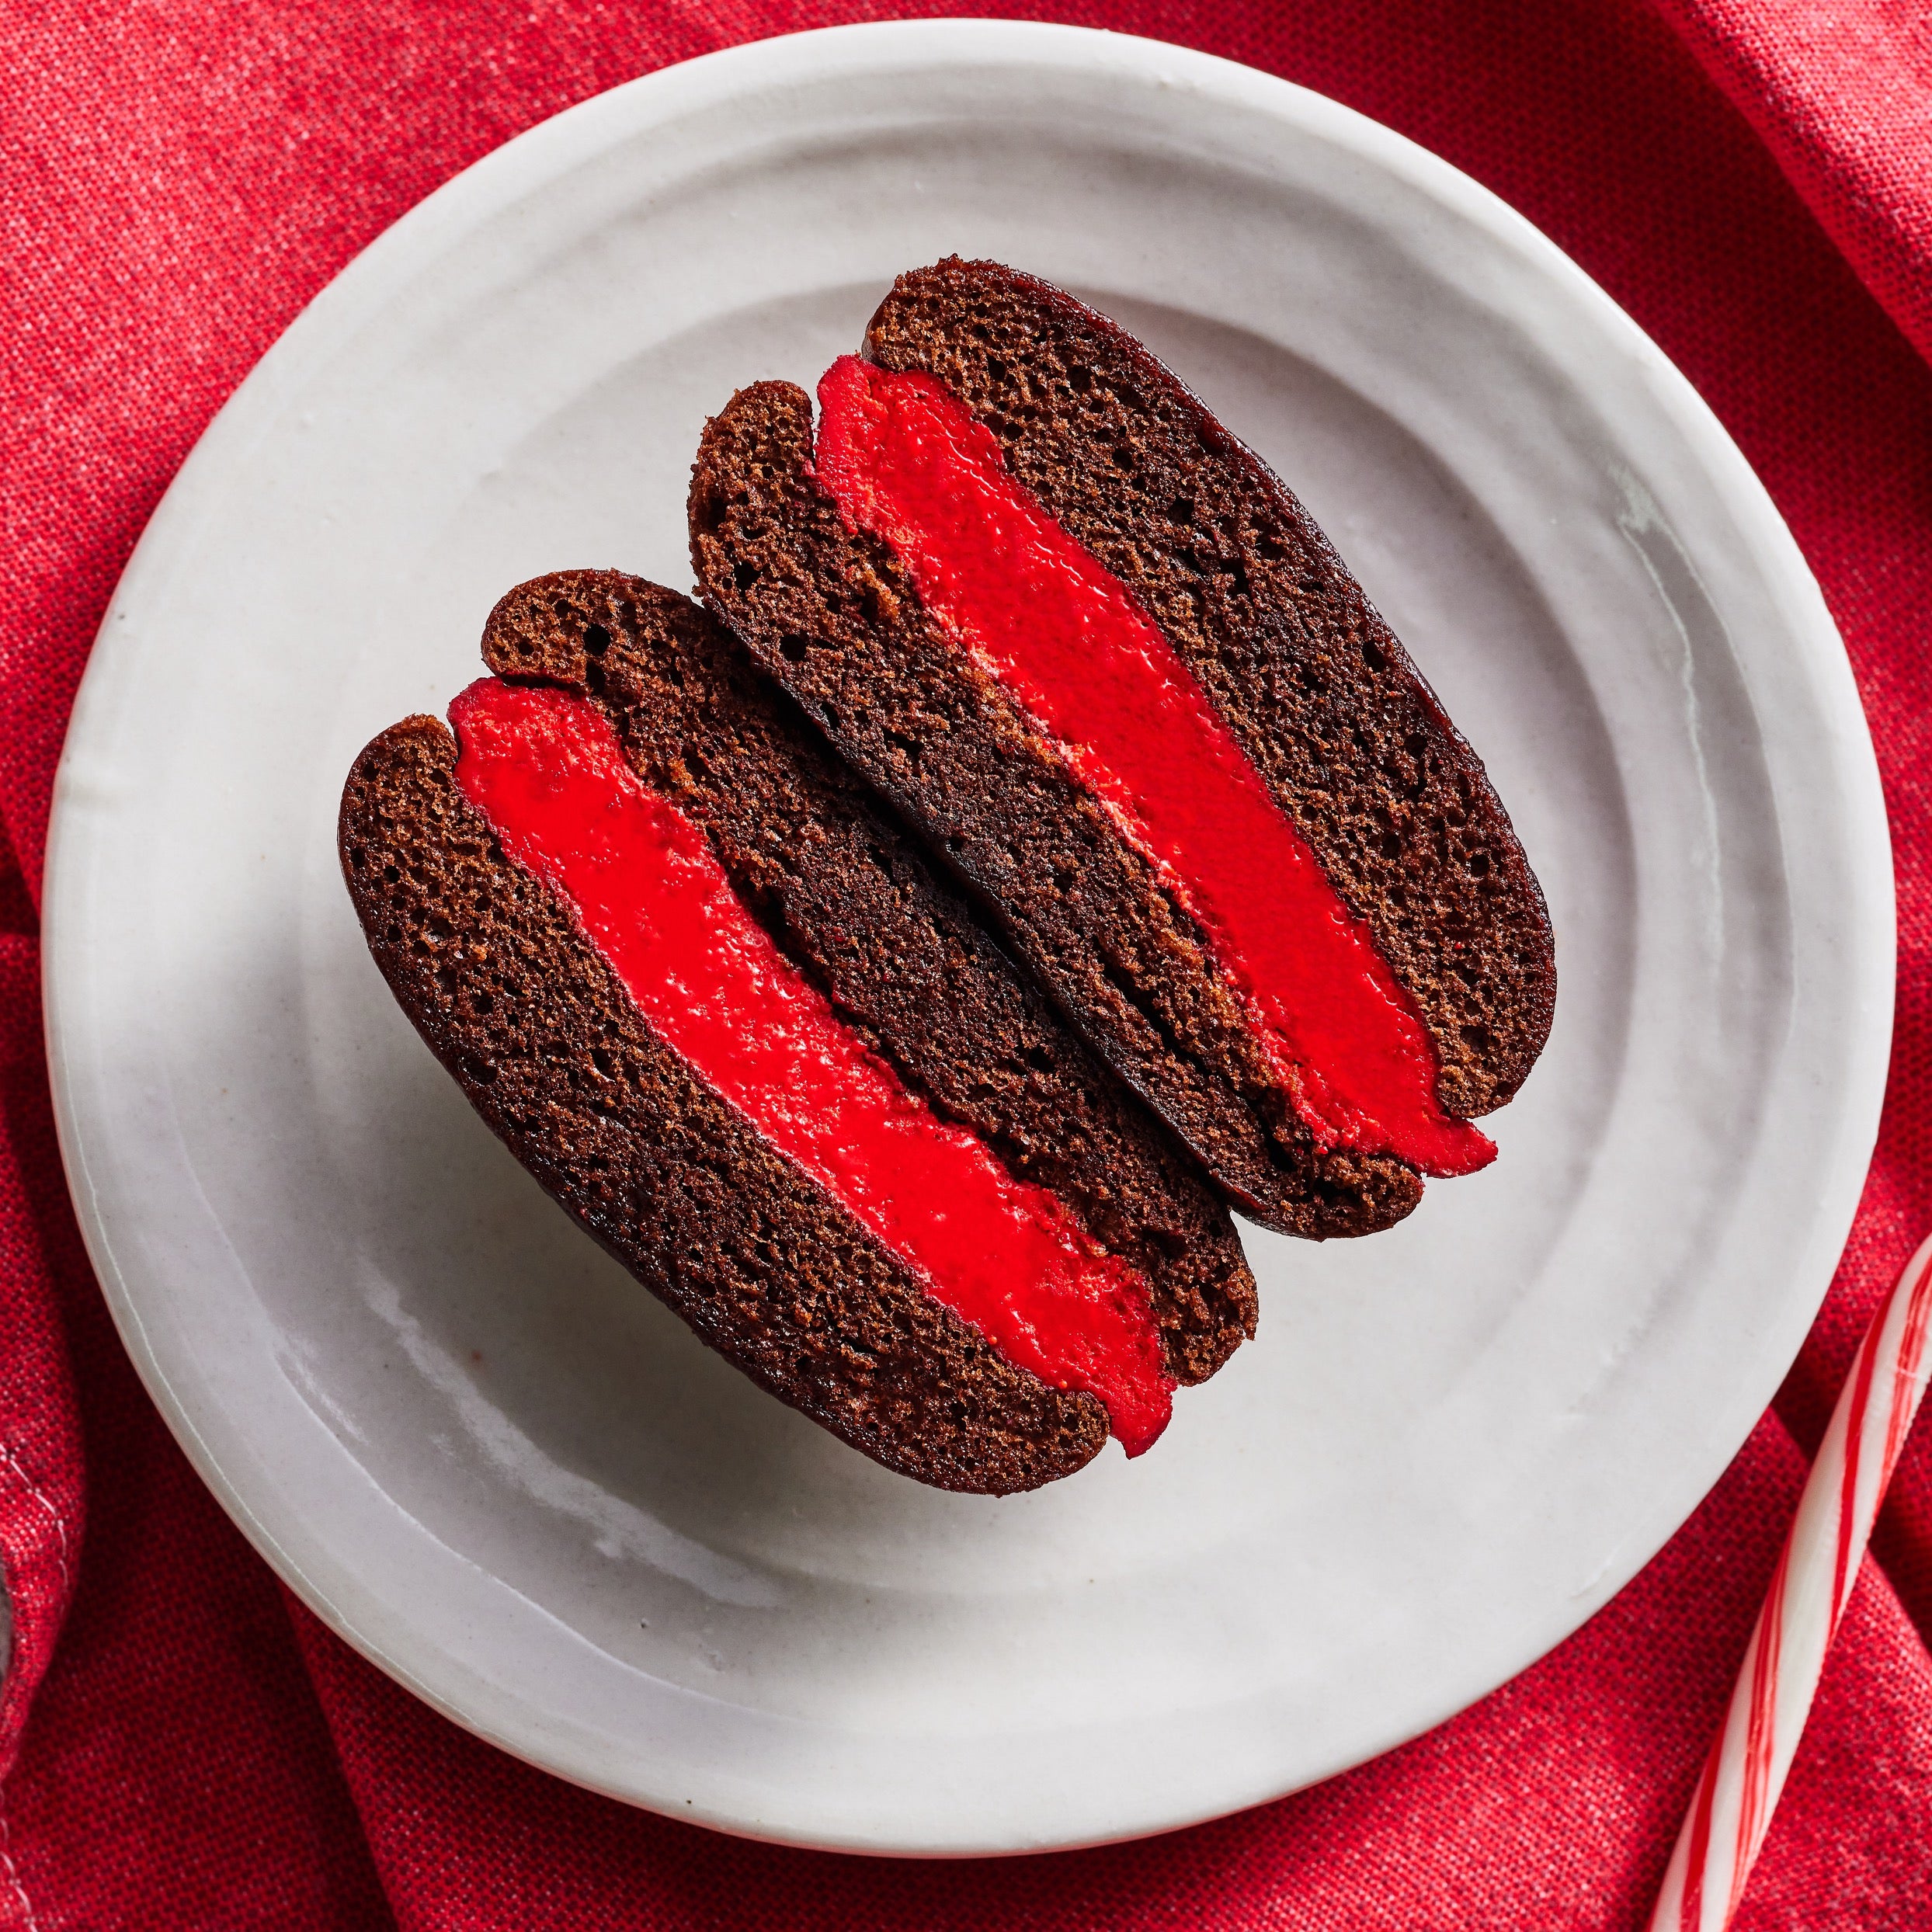 A single Chocolate Peppermint whoopie pie, cut in half showing the cross section, plated alongside a red linen